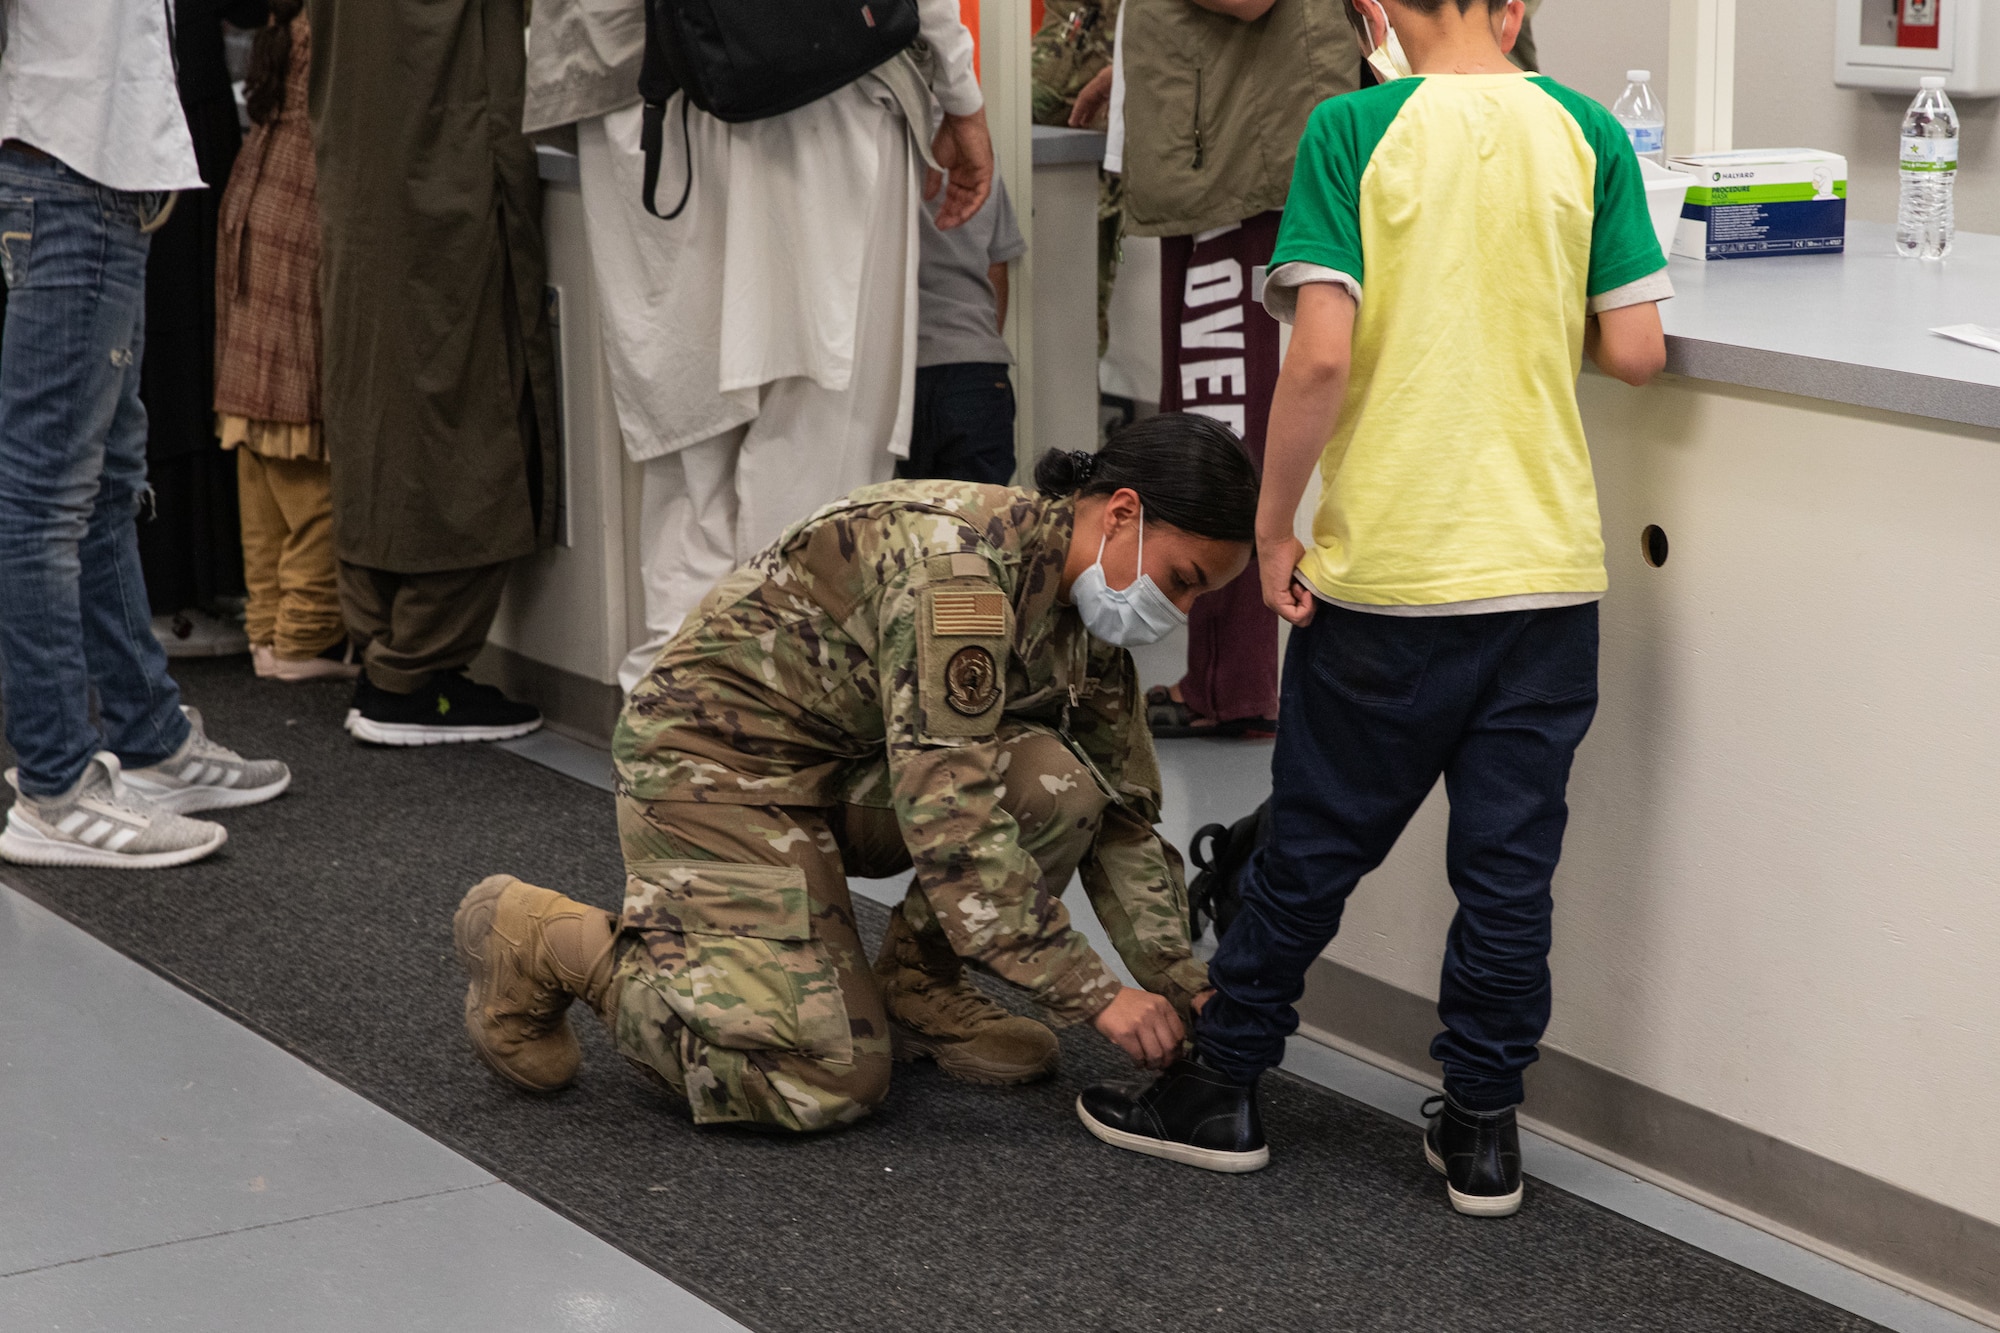 A Task Force-Holloman Airman ties an Afghan child’s shoes as he waits to in process at Holloman Air Force Base, New Mexico, Sept. 2, 2021. The Department of Defense, through U.S. Northern Command, and in support of the Department of Homeland Security, is providing transportation, temporary housing, medical screening, and general support for at least 50,000 Afghan evacuees at suitable facilities, in permanent or temporary structures, as quickly as possible. This initiative provides Afghan personnel essential support at secure locations outside Afghanistan. (U.S. Army photo by Spc. Nicholas Goodman)